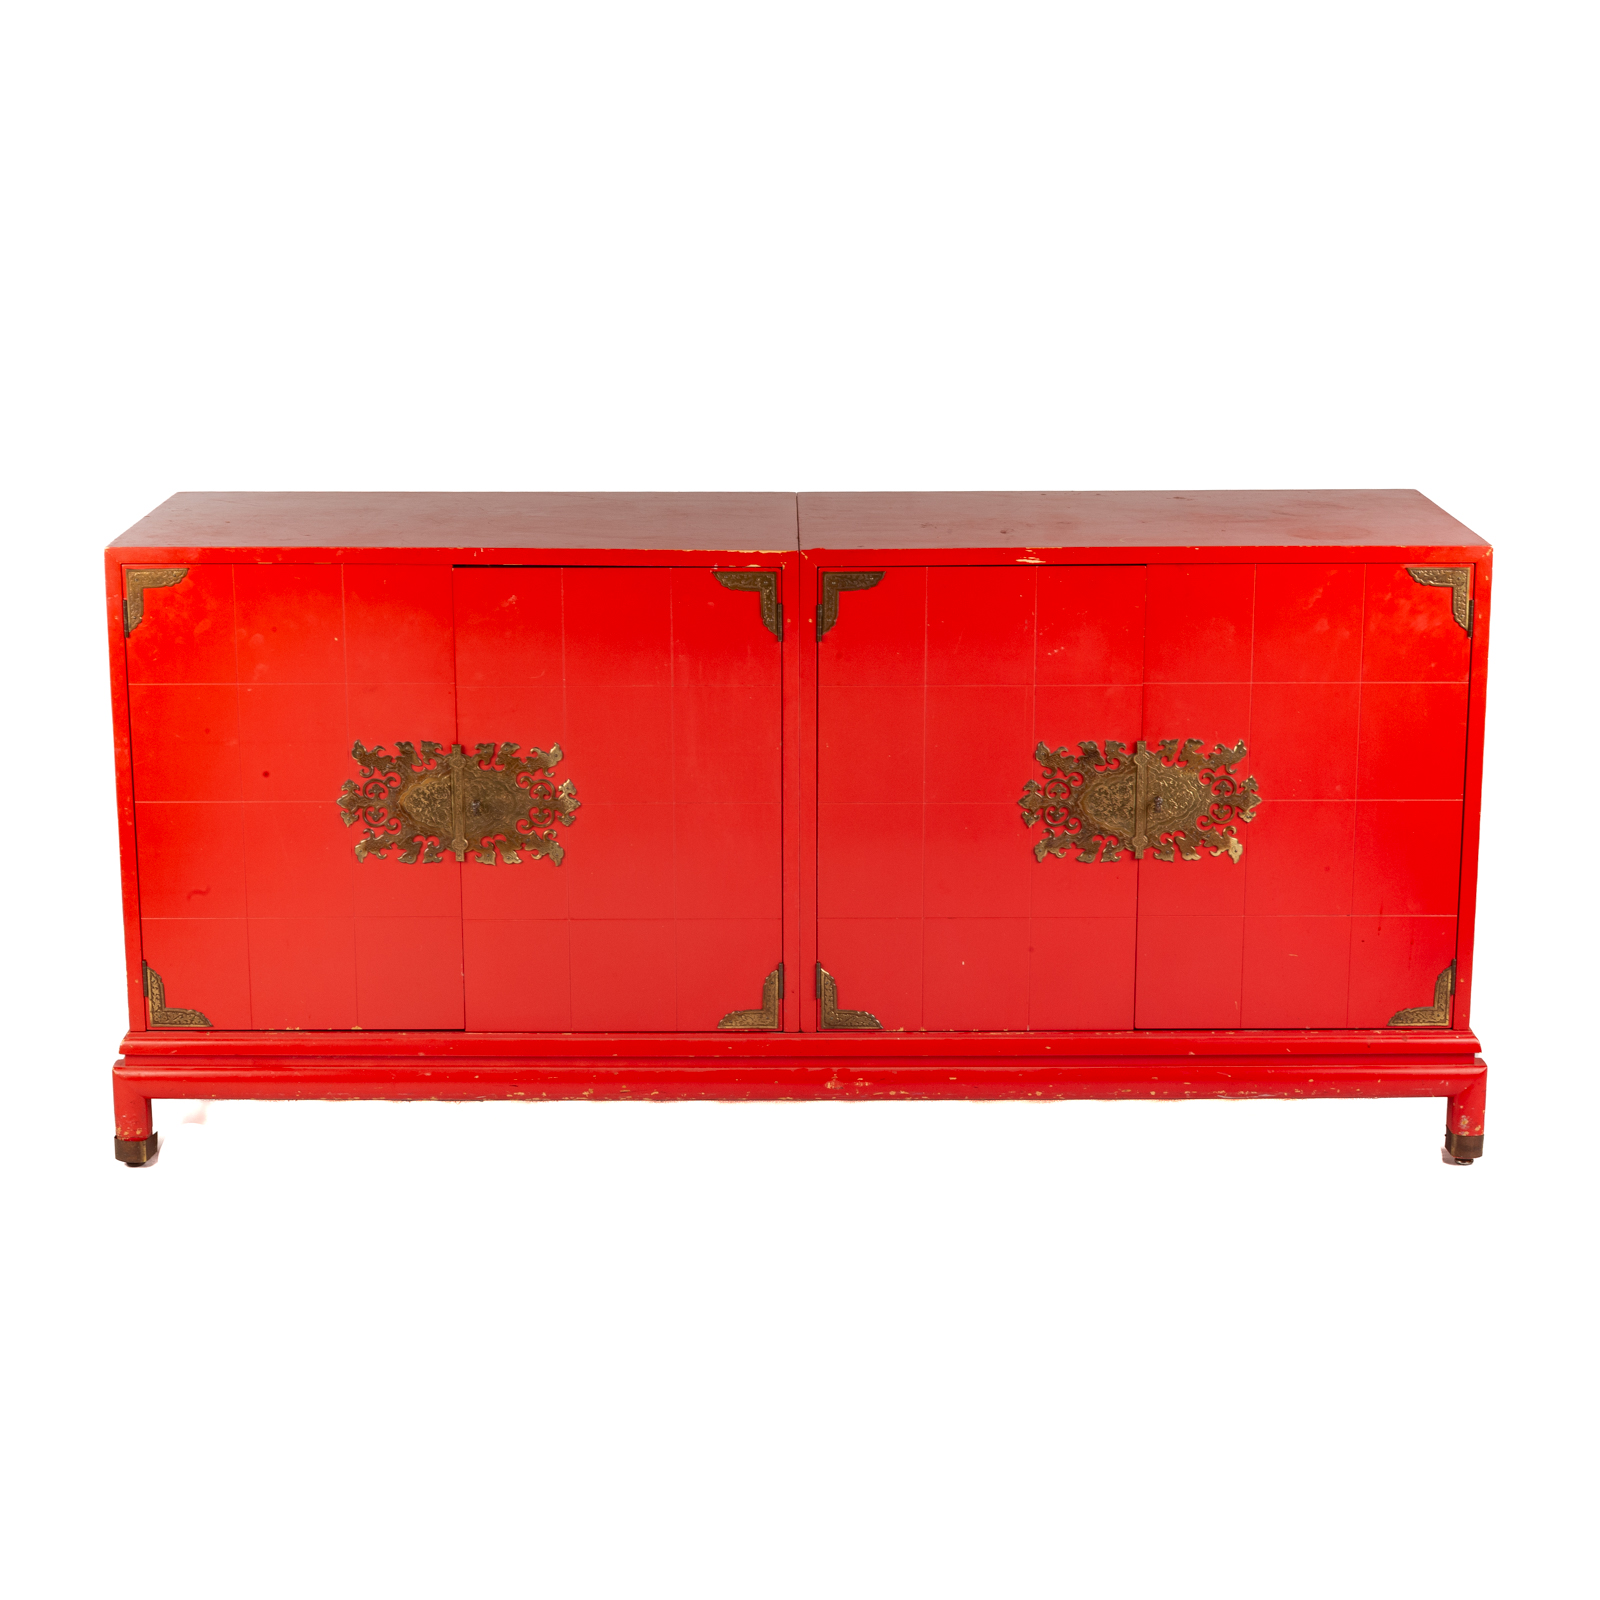 ASIAN RED LACQUER FOUR DOOR CABINET 2eae9c